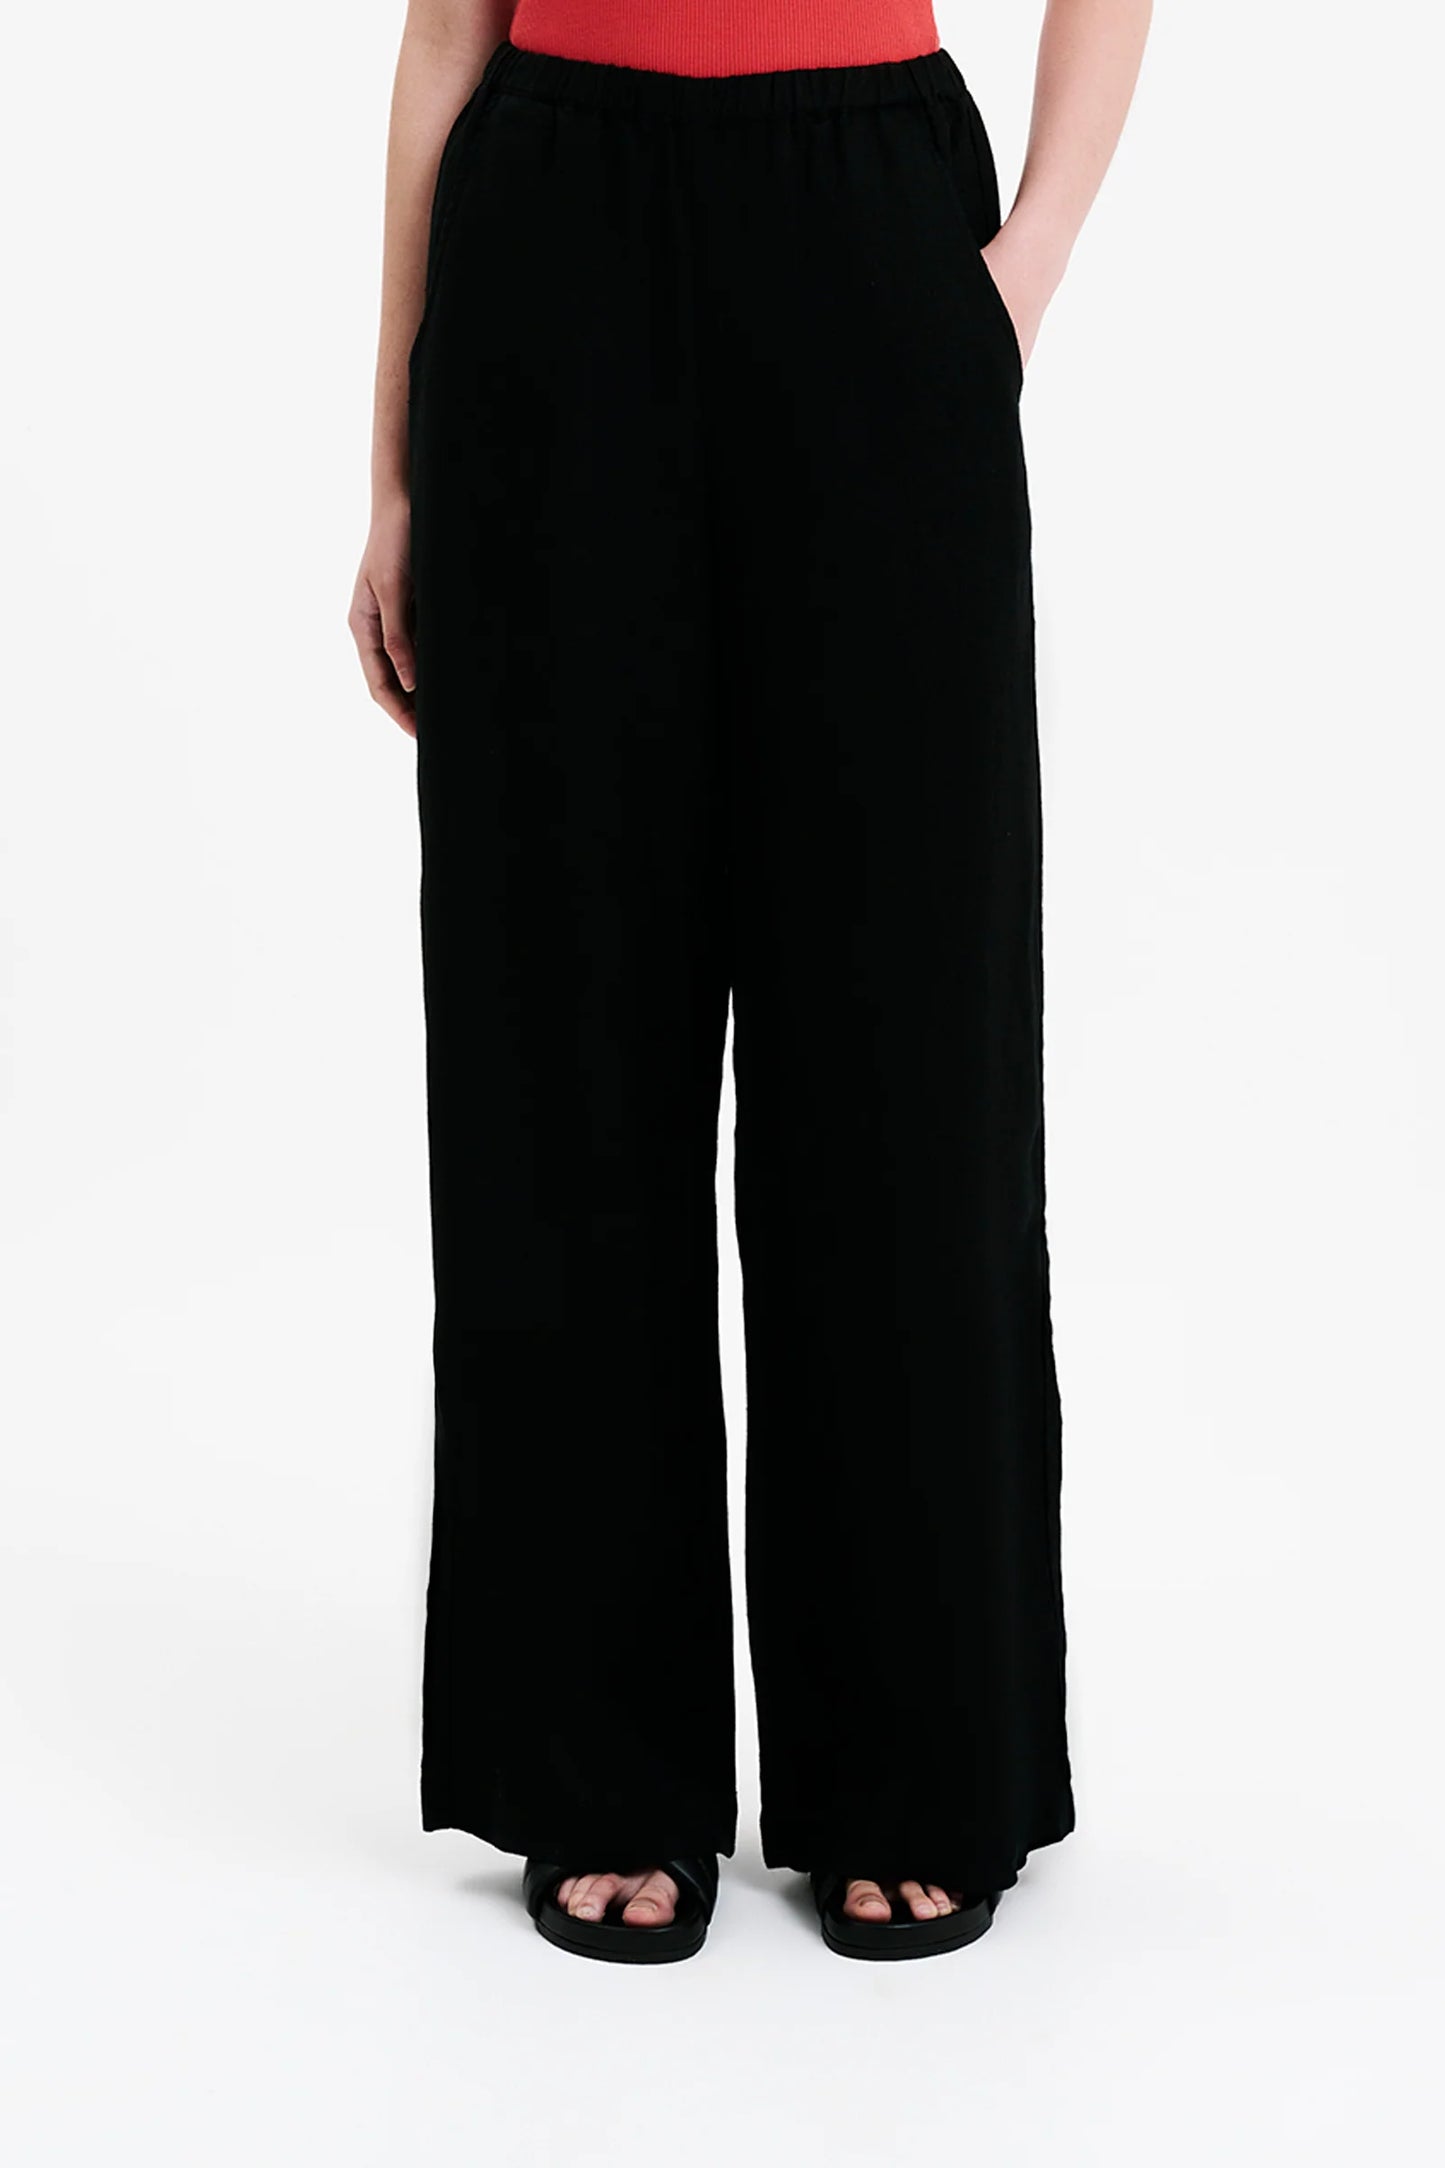 Nude Lucy CERES LINEN PANT - BLACK